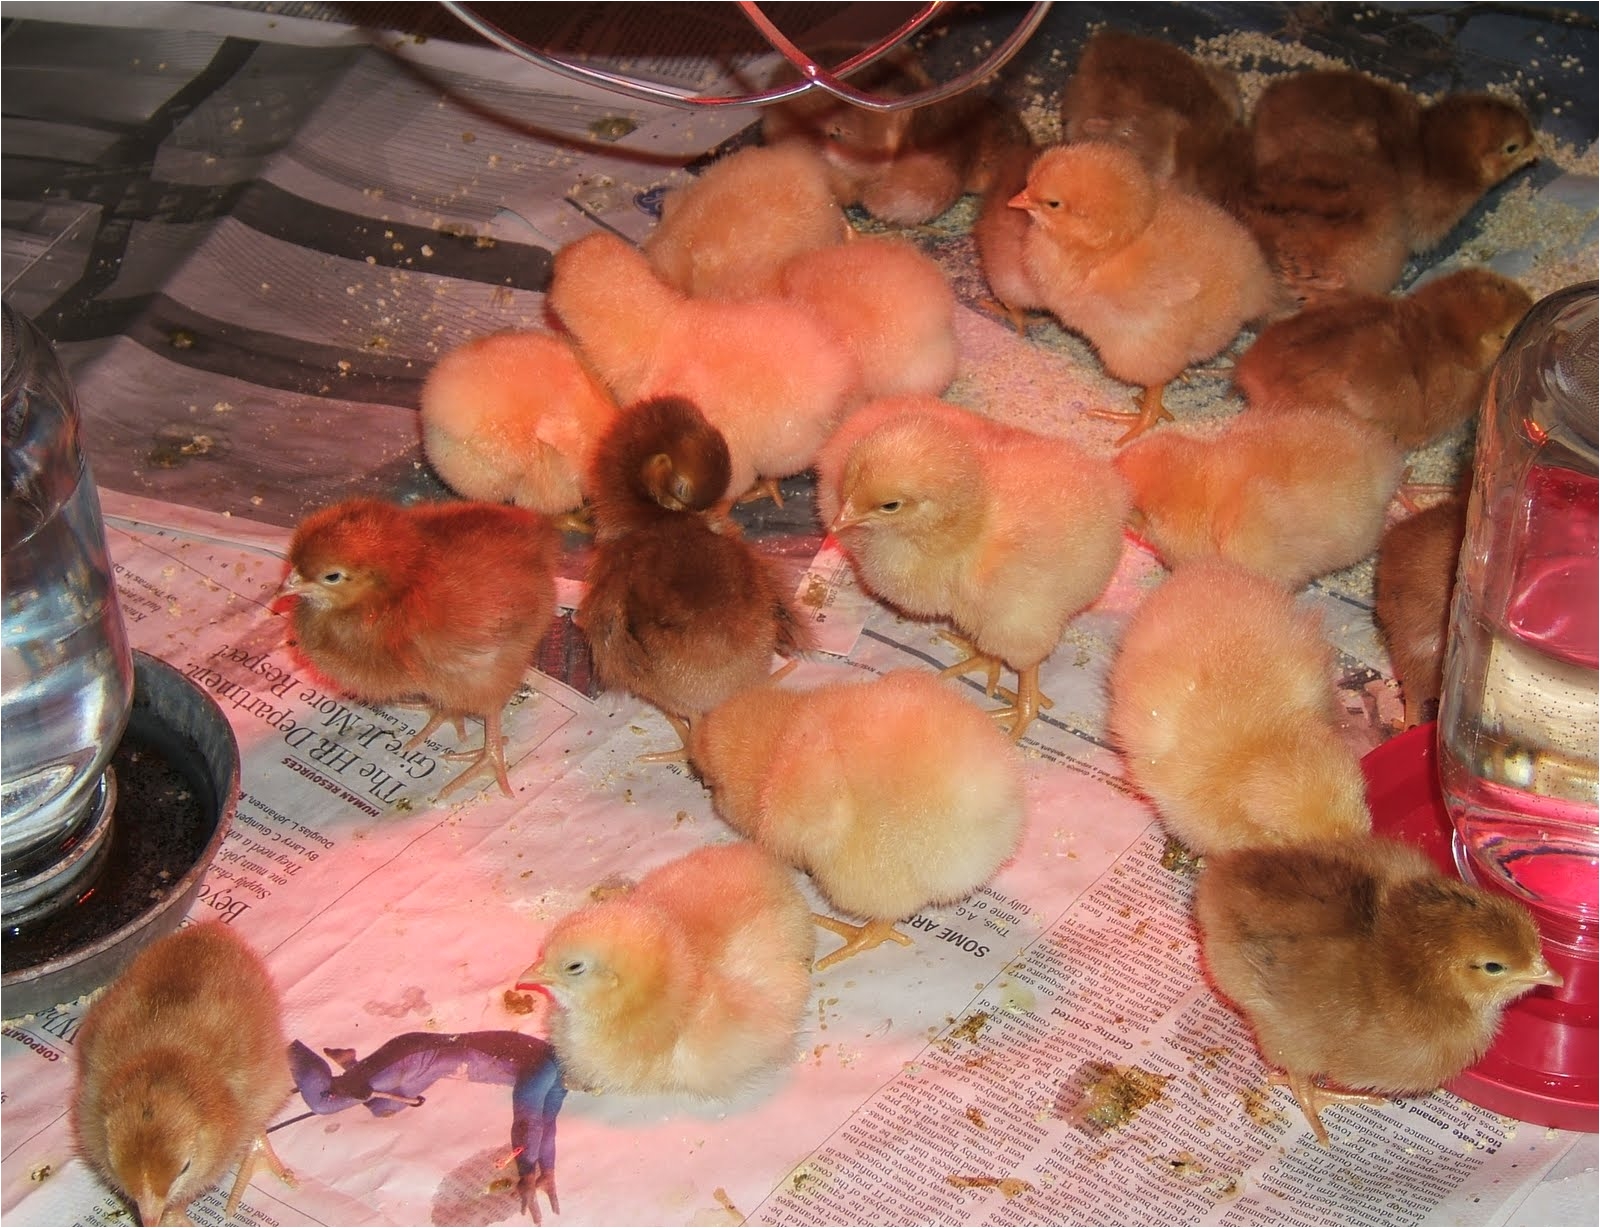 Tractor Supply Red Heat Lamp Reader Questions Heat Lamps and Baby Chicks Community Chickens